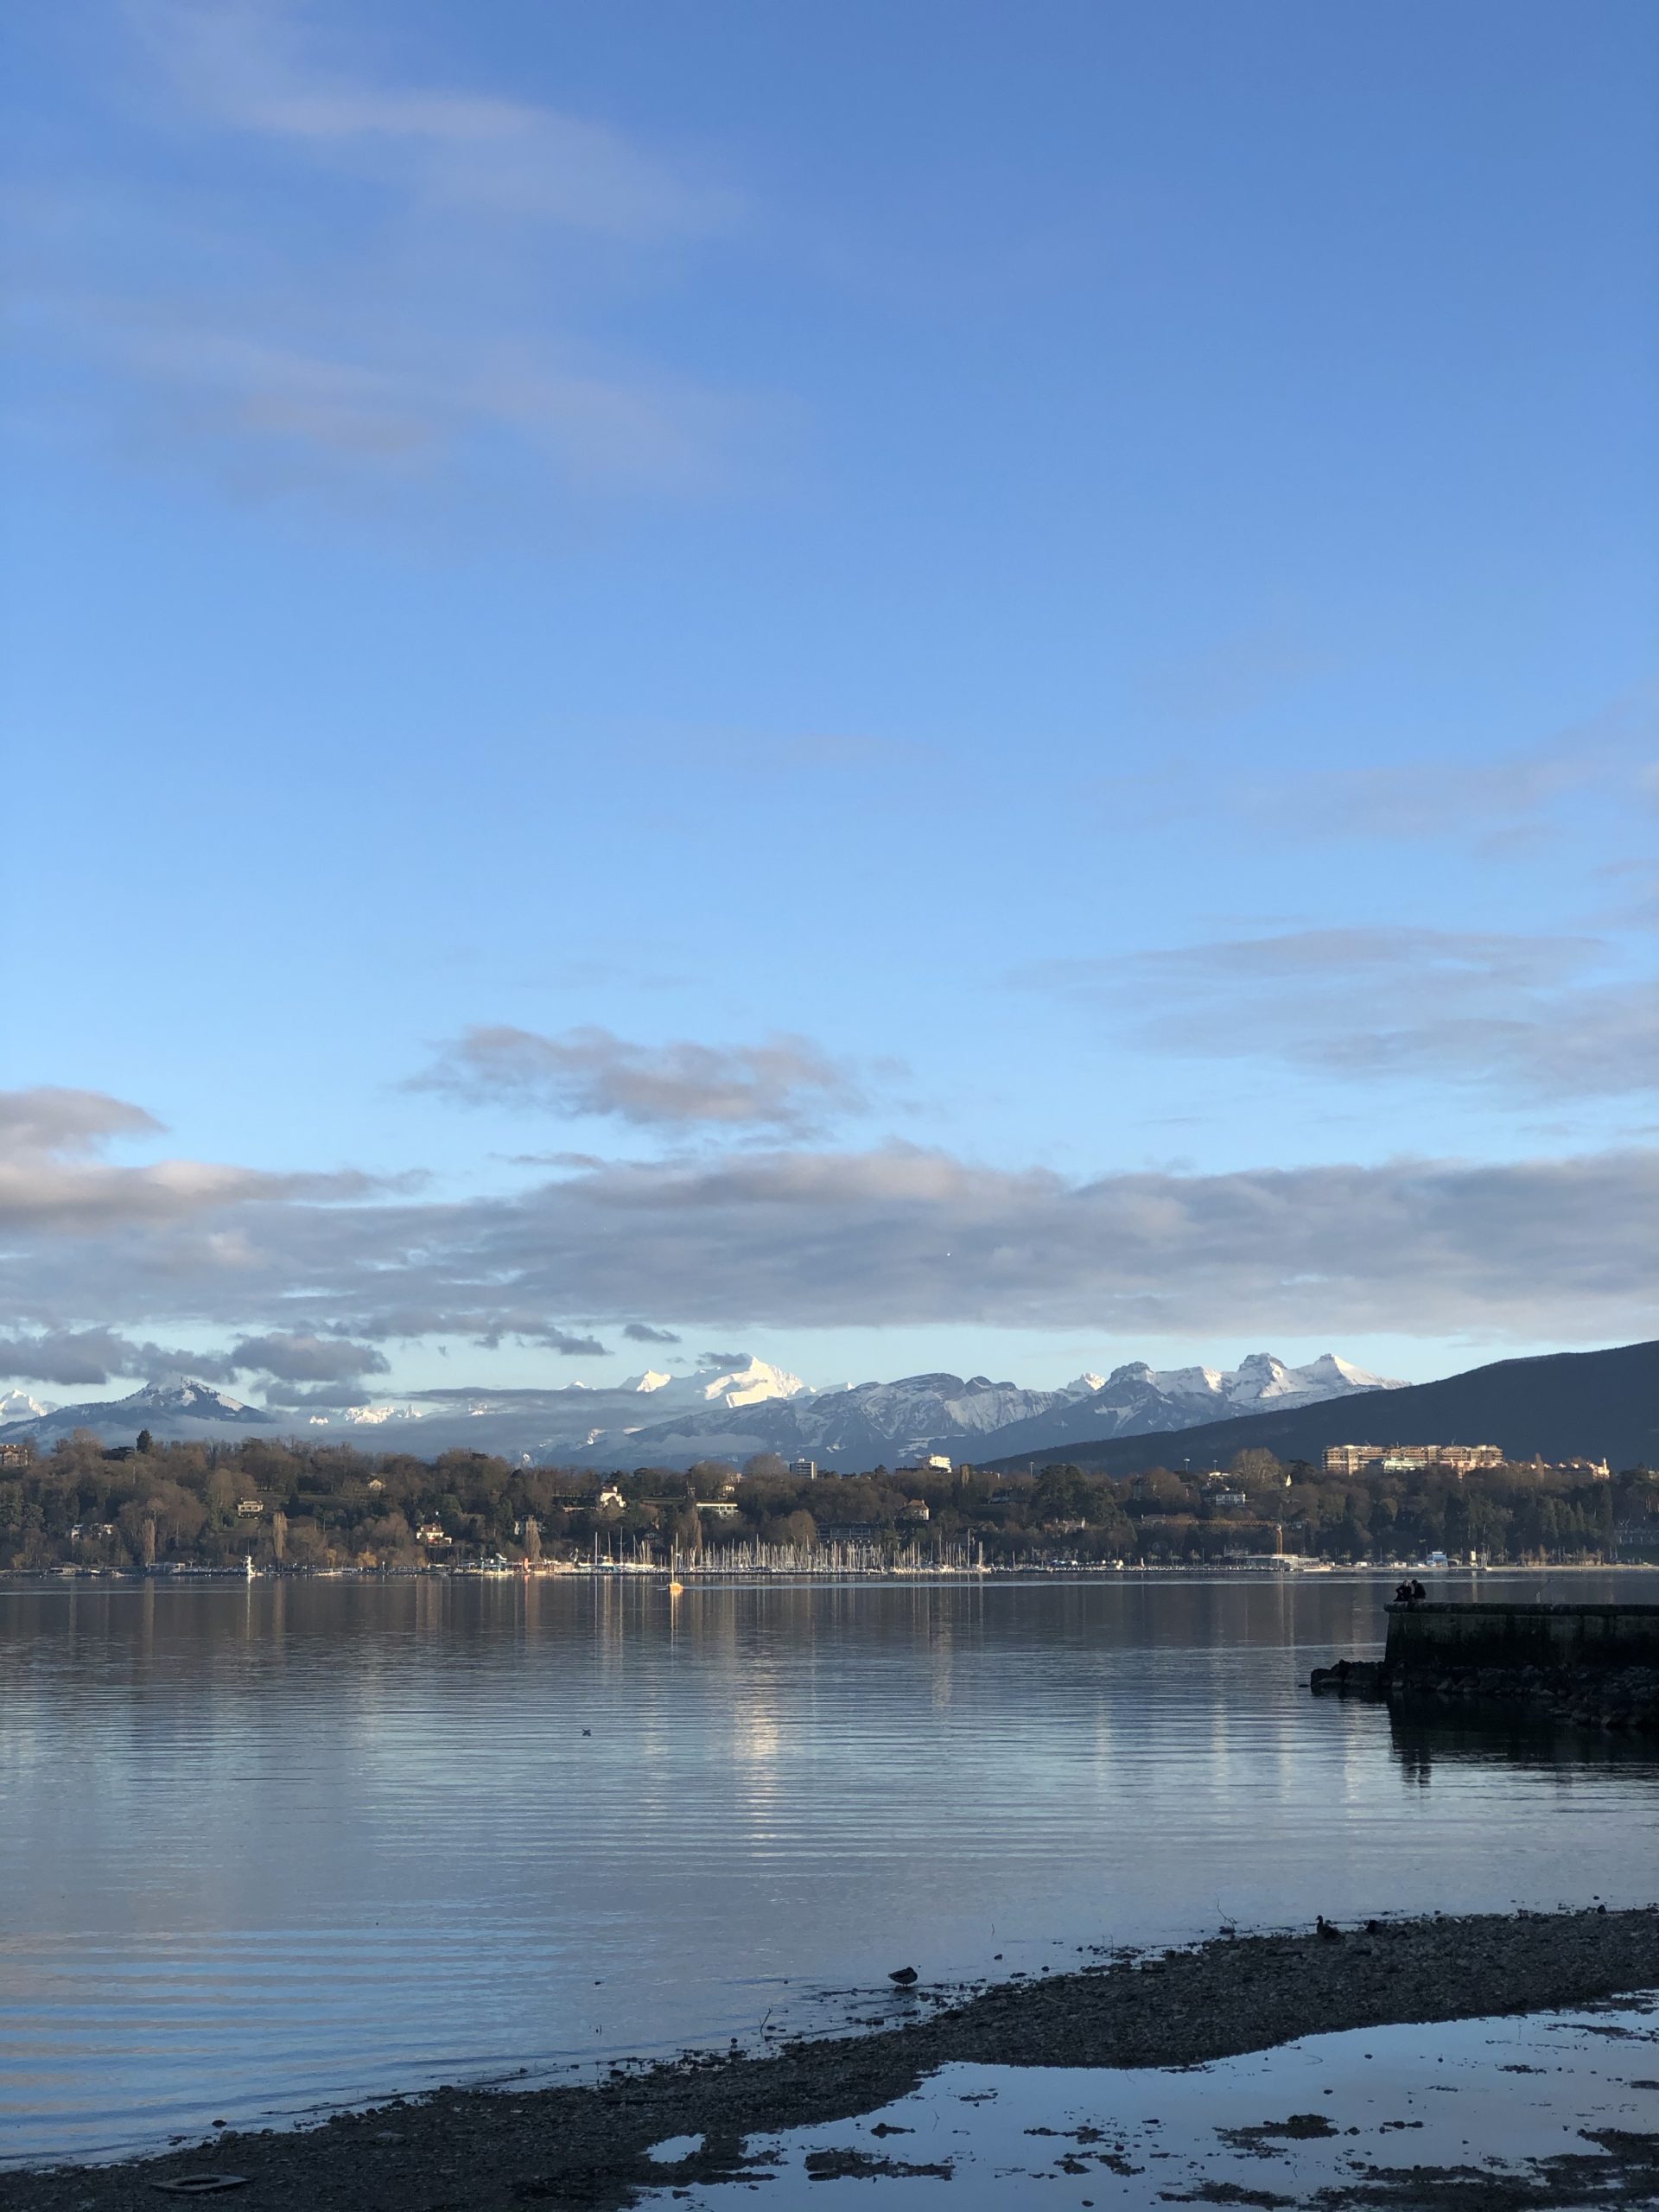 View of the Alps and the Lac Léman